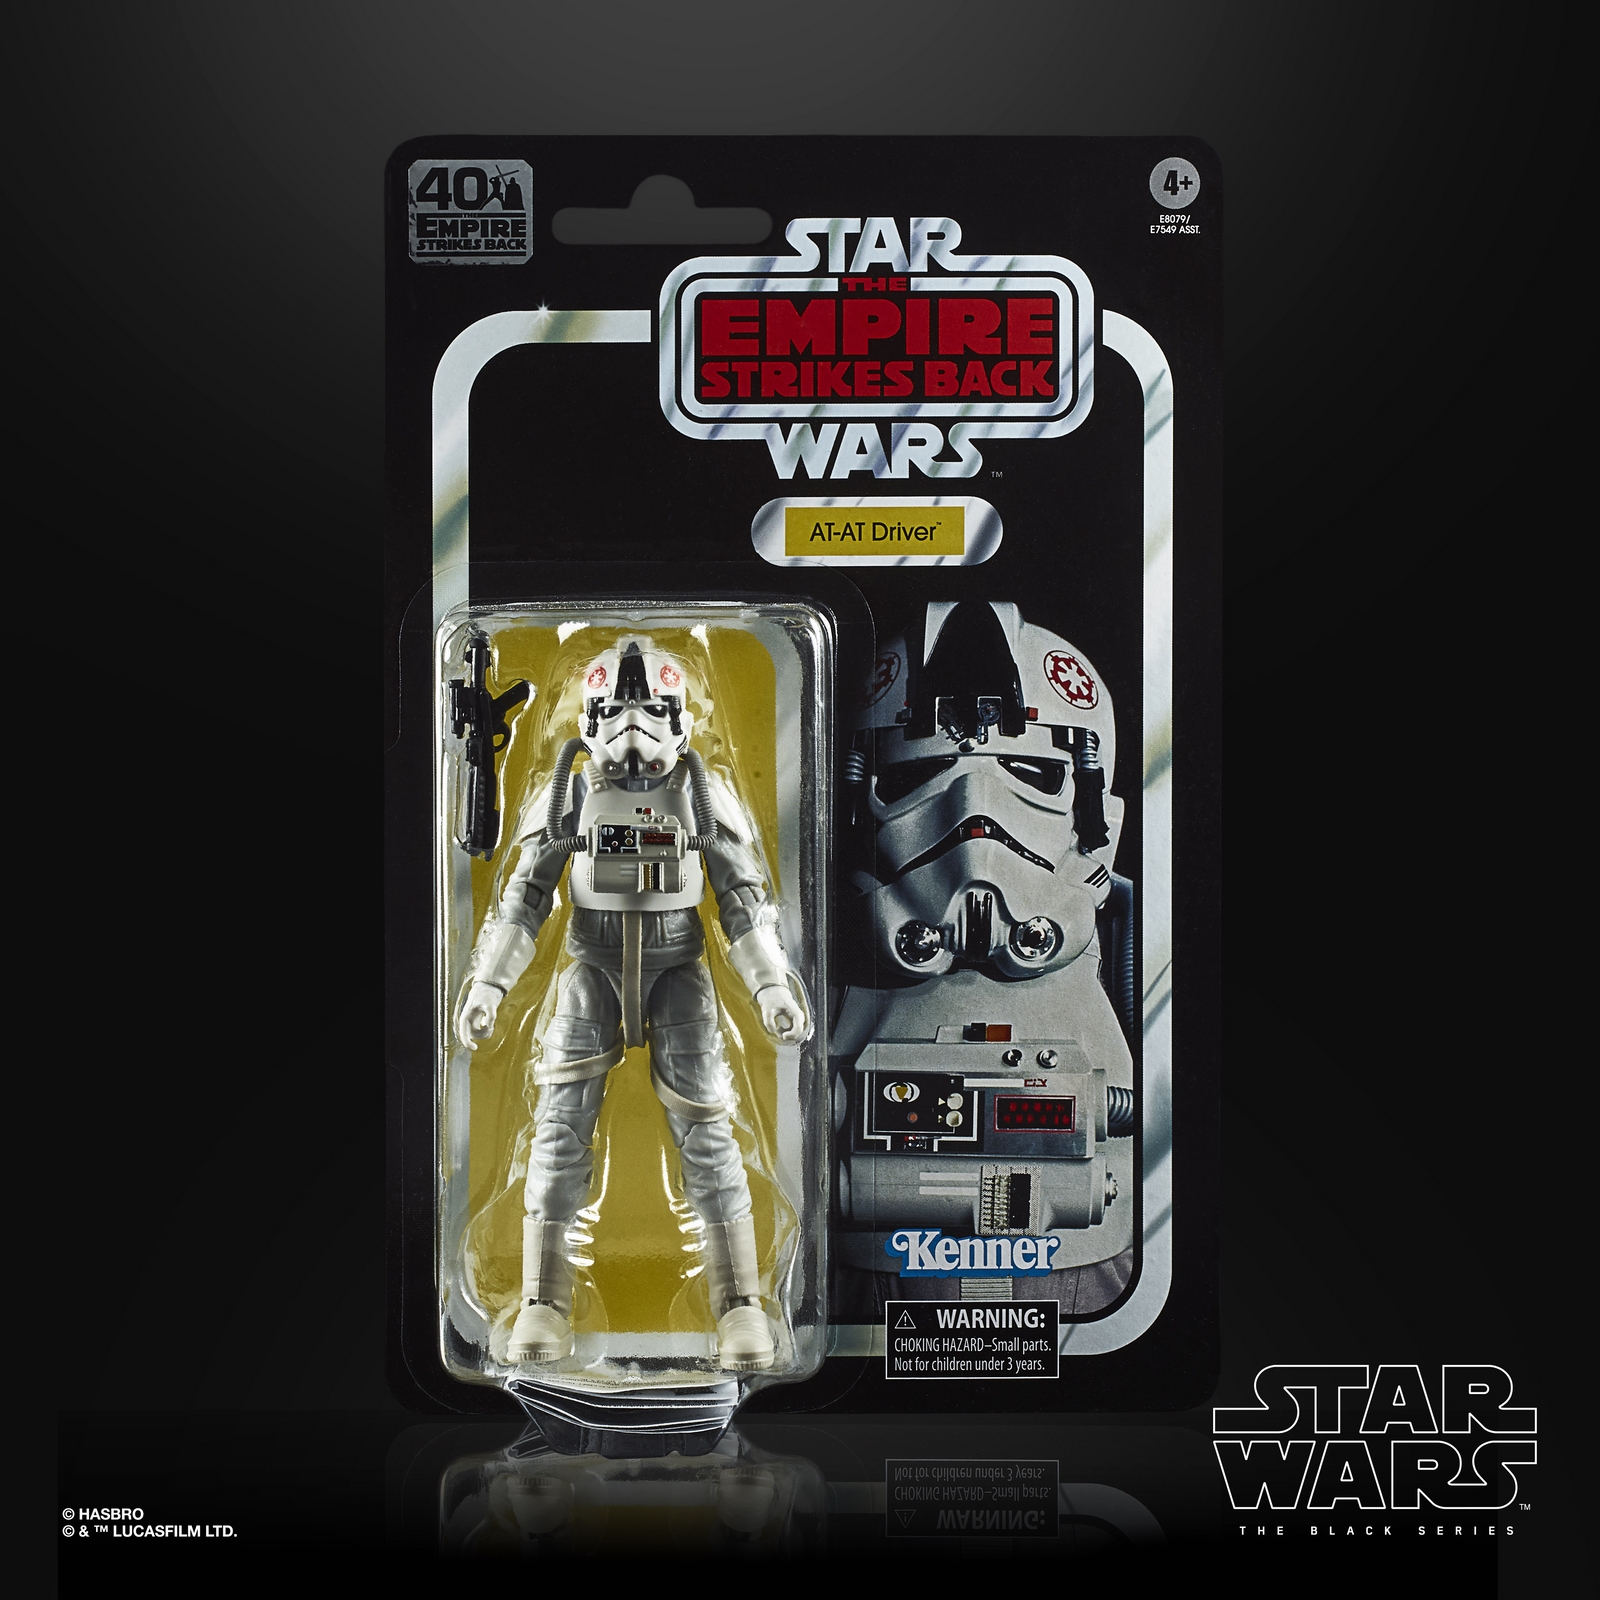 STAR-WARS-THE-BLACK-SERIES-40TH-ANNIVERSARY-6-INCH-AT-AT-DRIVER---in-pck.jpg